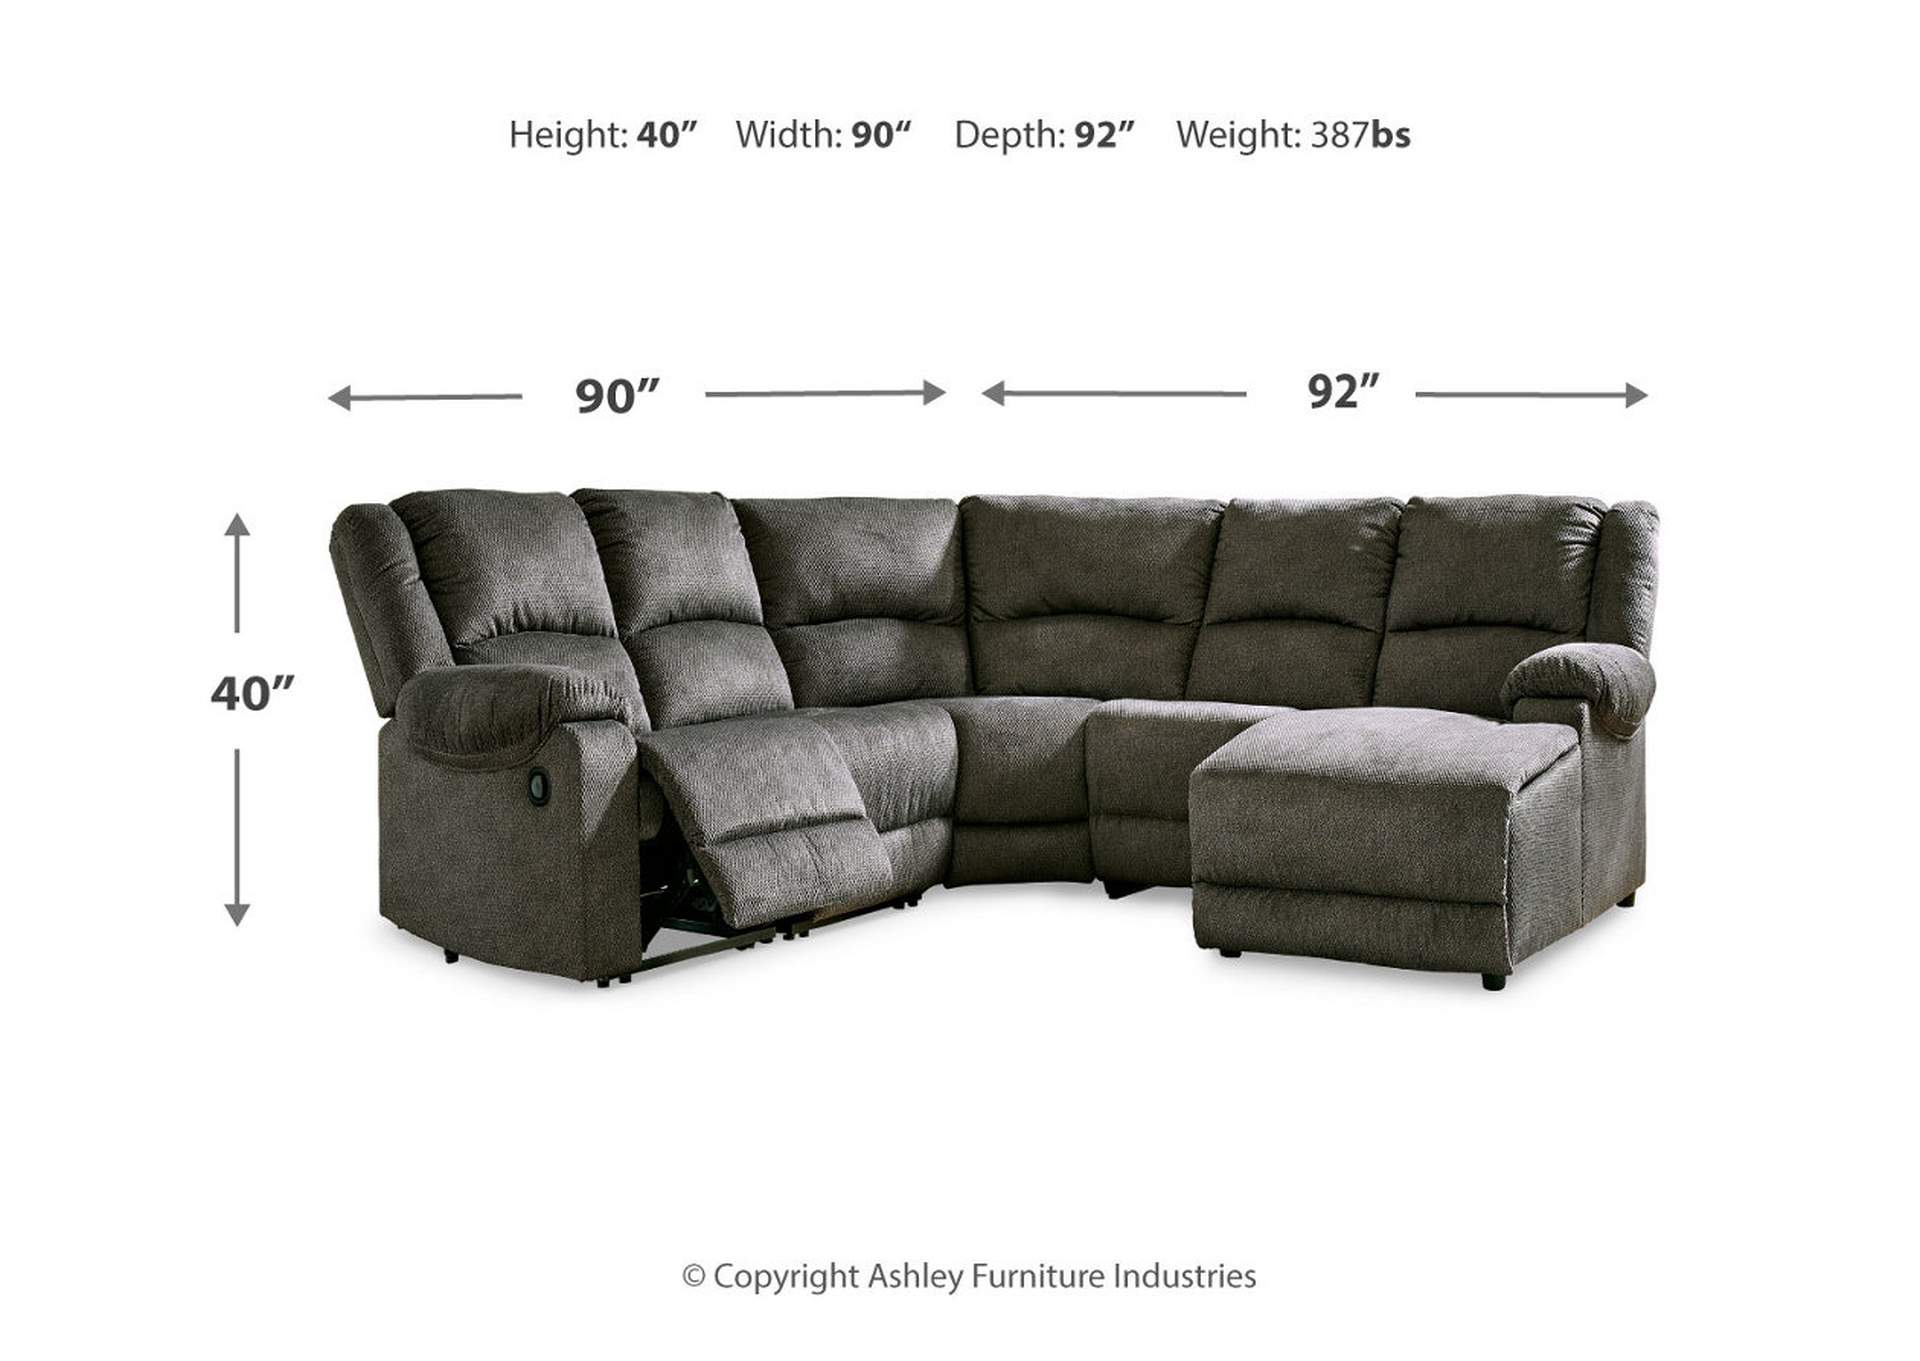 Benlocke 5-Piece Reclining Sectional with Chaise,Signature Design By Ashley